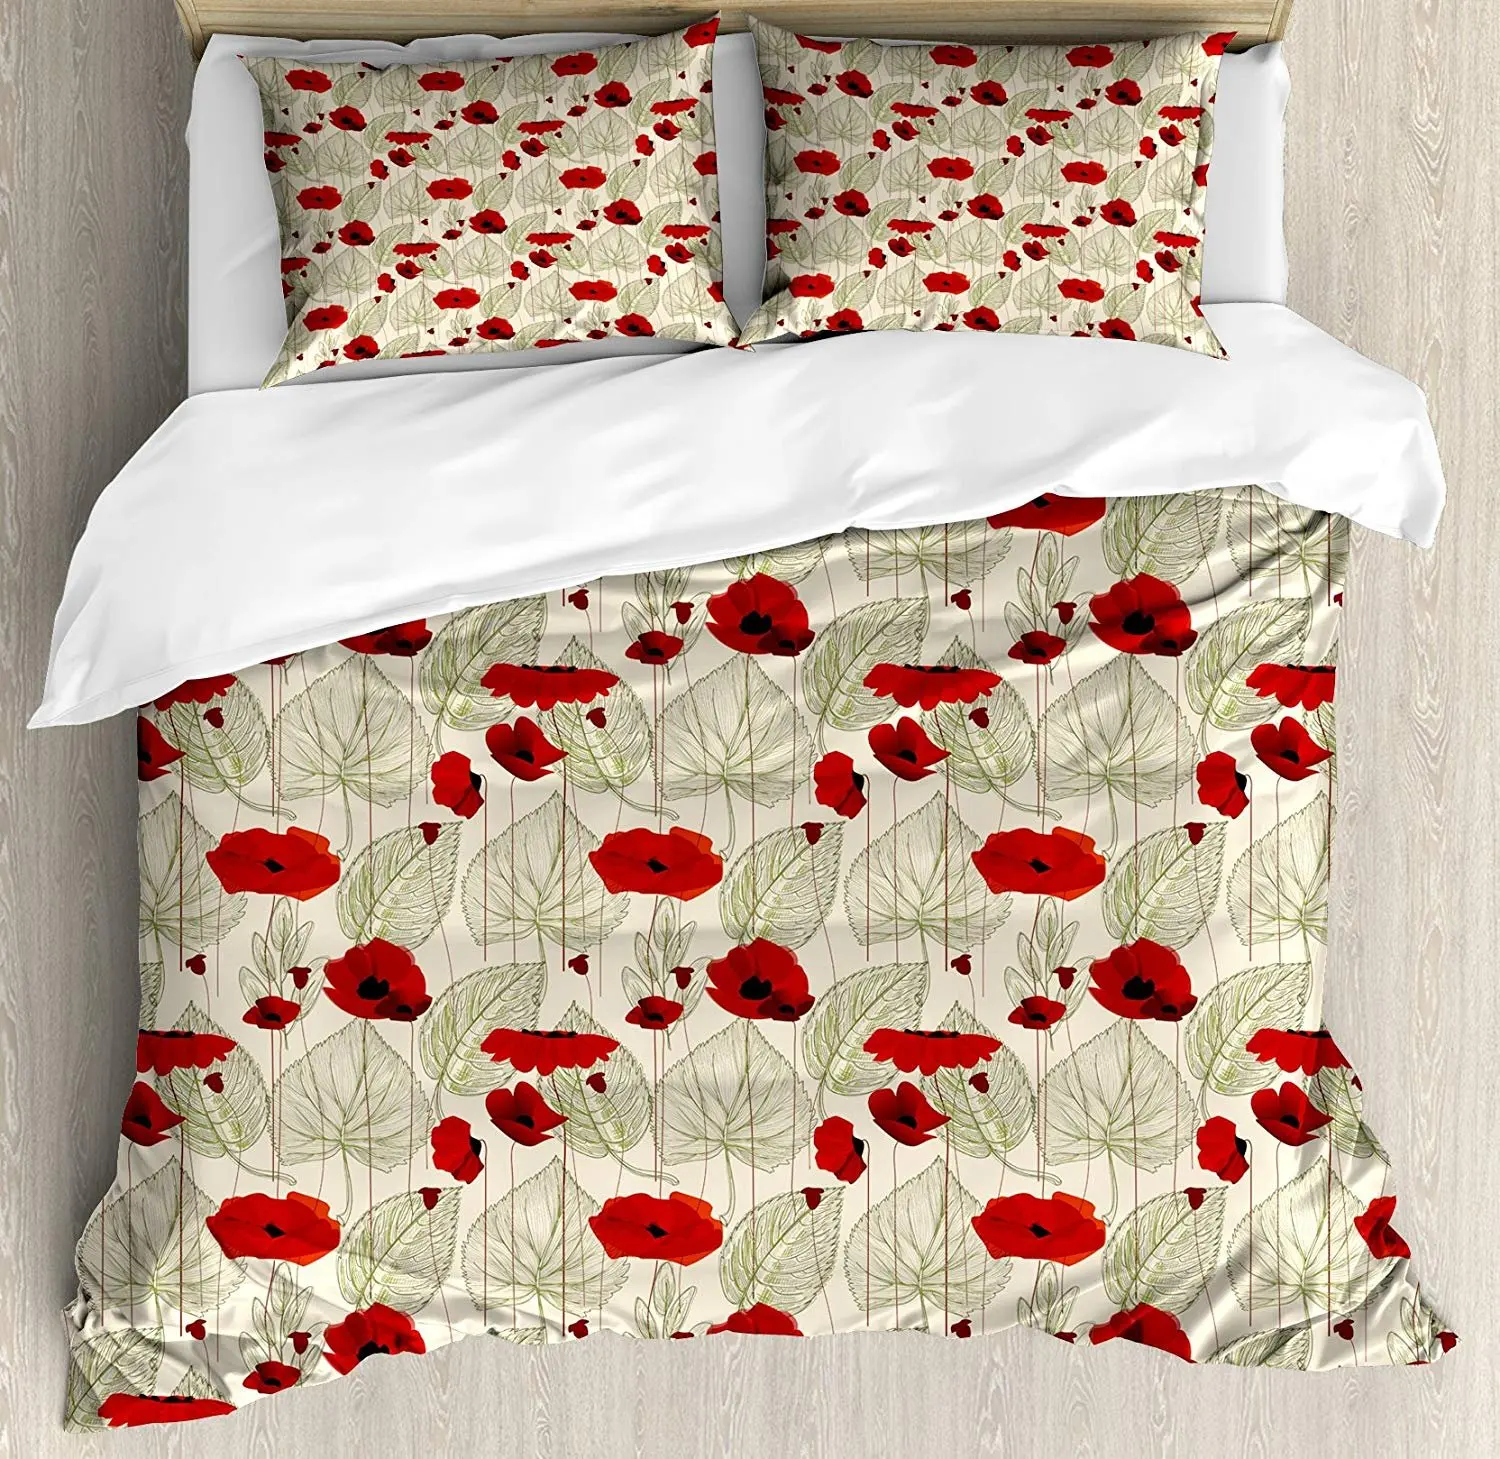 

Poppy Bedding Set Sketchy Tree Leaves with Rural Floral Growth Botany Nature Inspired Art Duvet Cover Pillowcase For Home